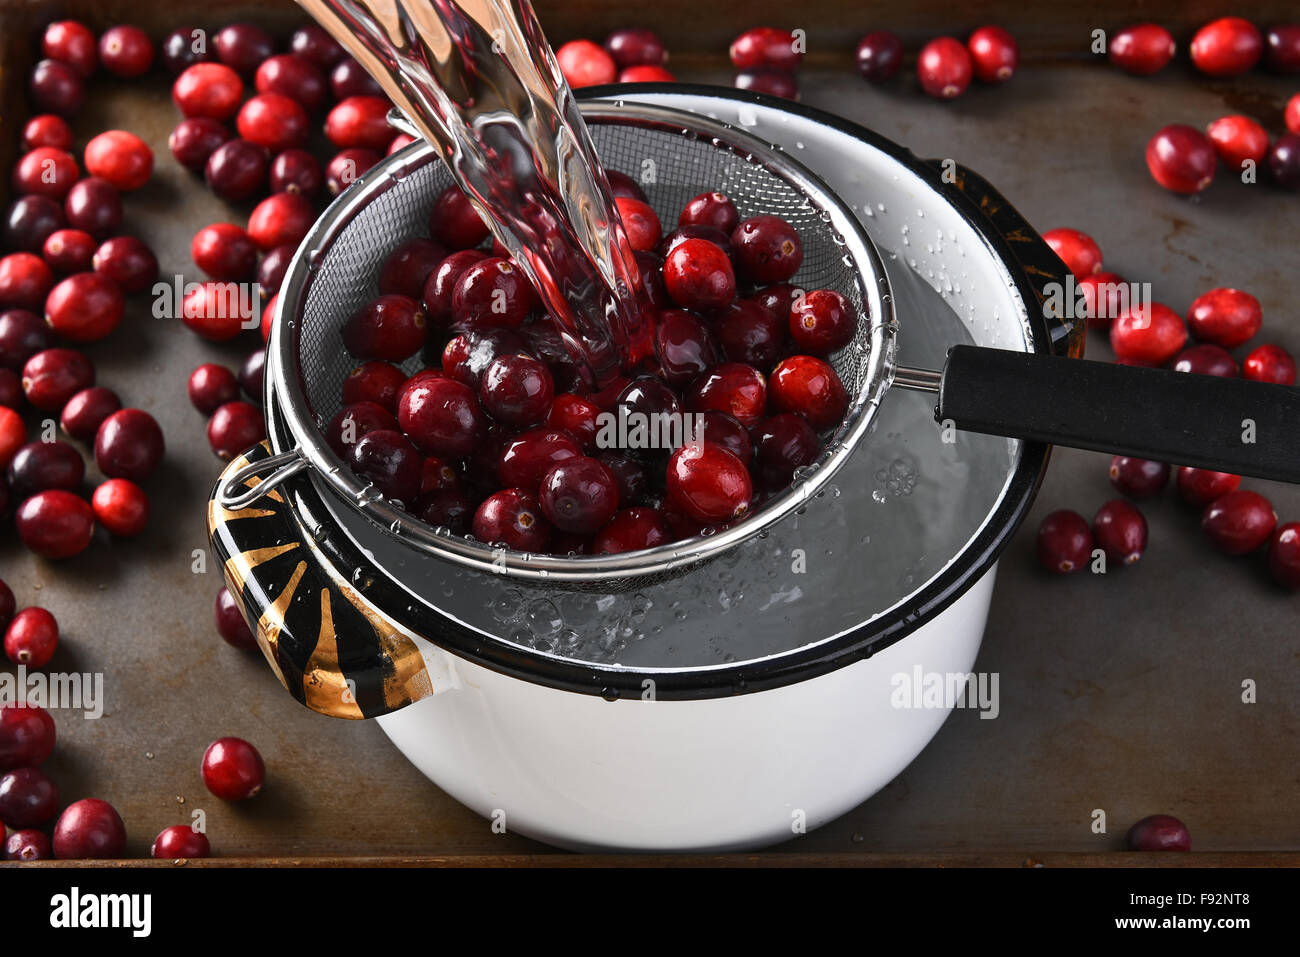 Washing cranberries to make cranberry sauce for Thanksgiving. Stock Photo